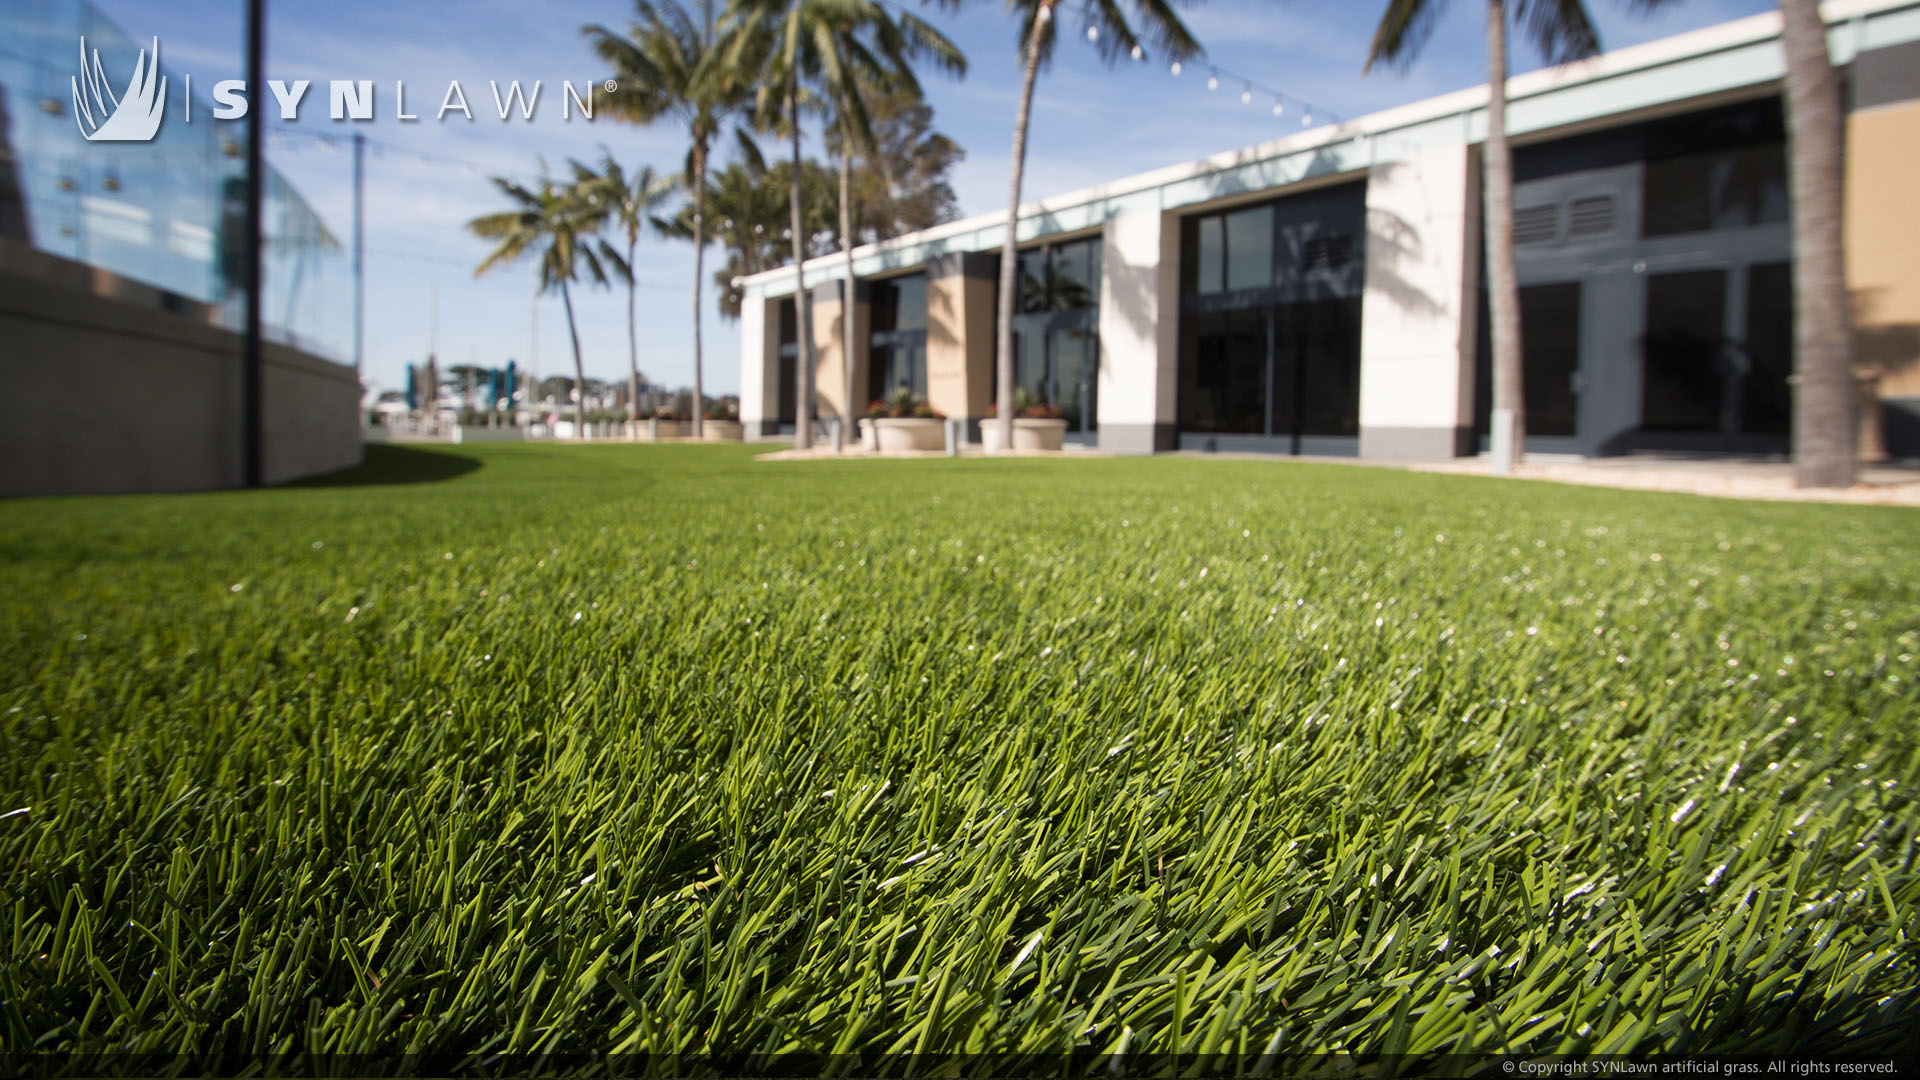 Commercial artificial grass lawn from SYNLawn